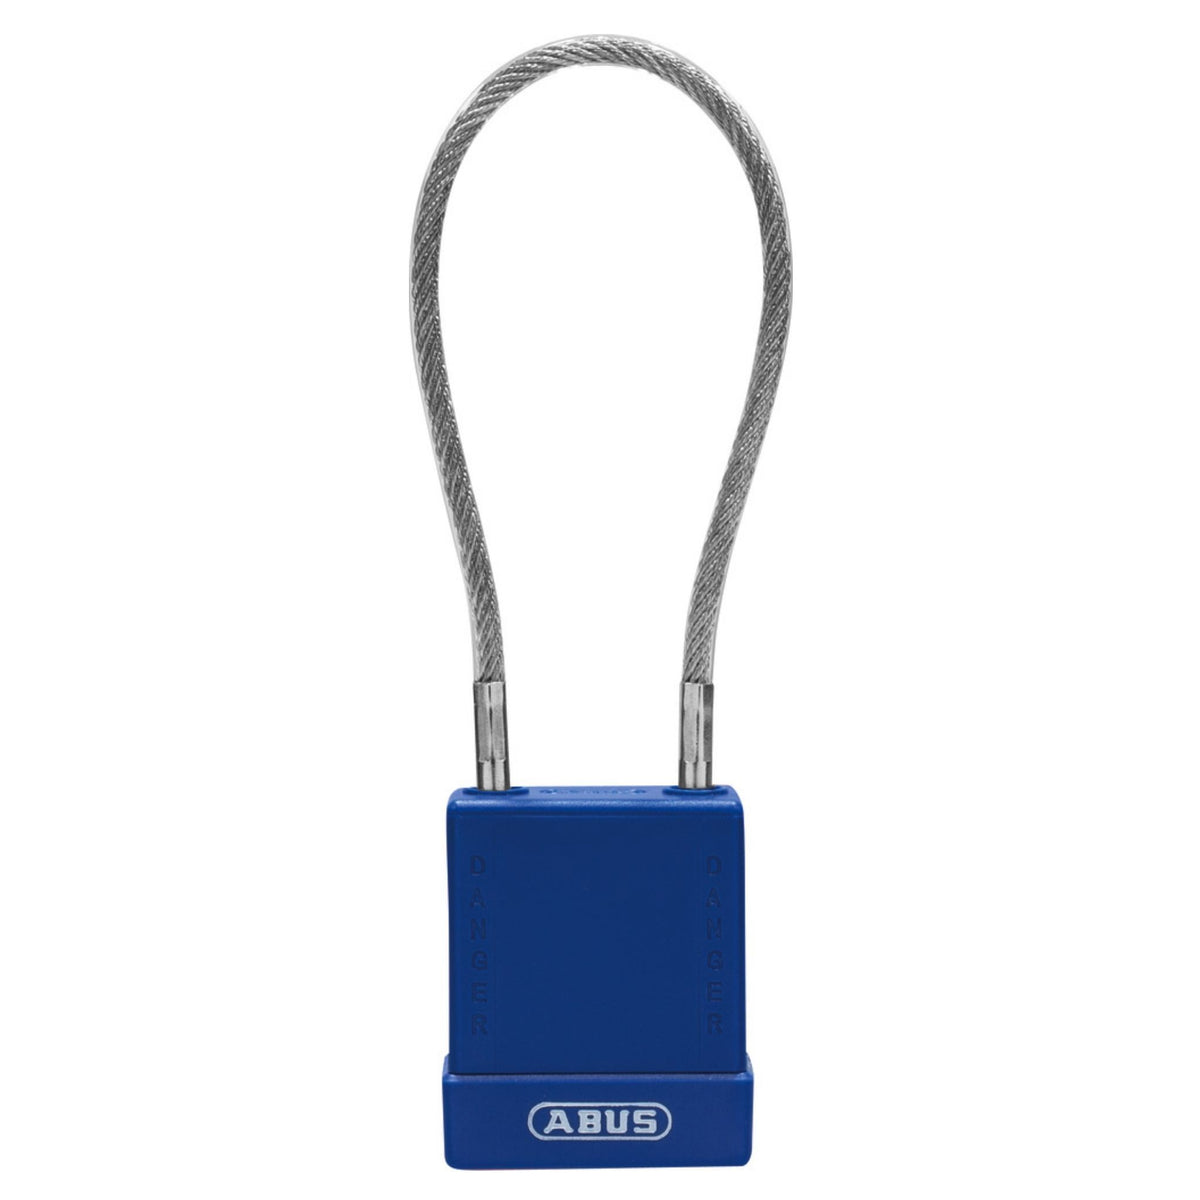 Abus 76/40CAB40 KA Blue Safety Padlock with 8-Inch Cable - The Lock Source